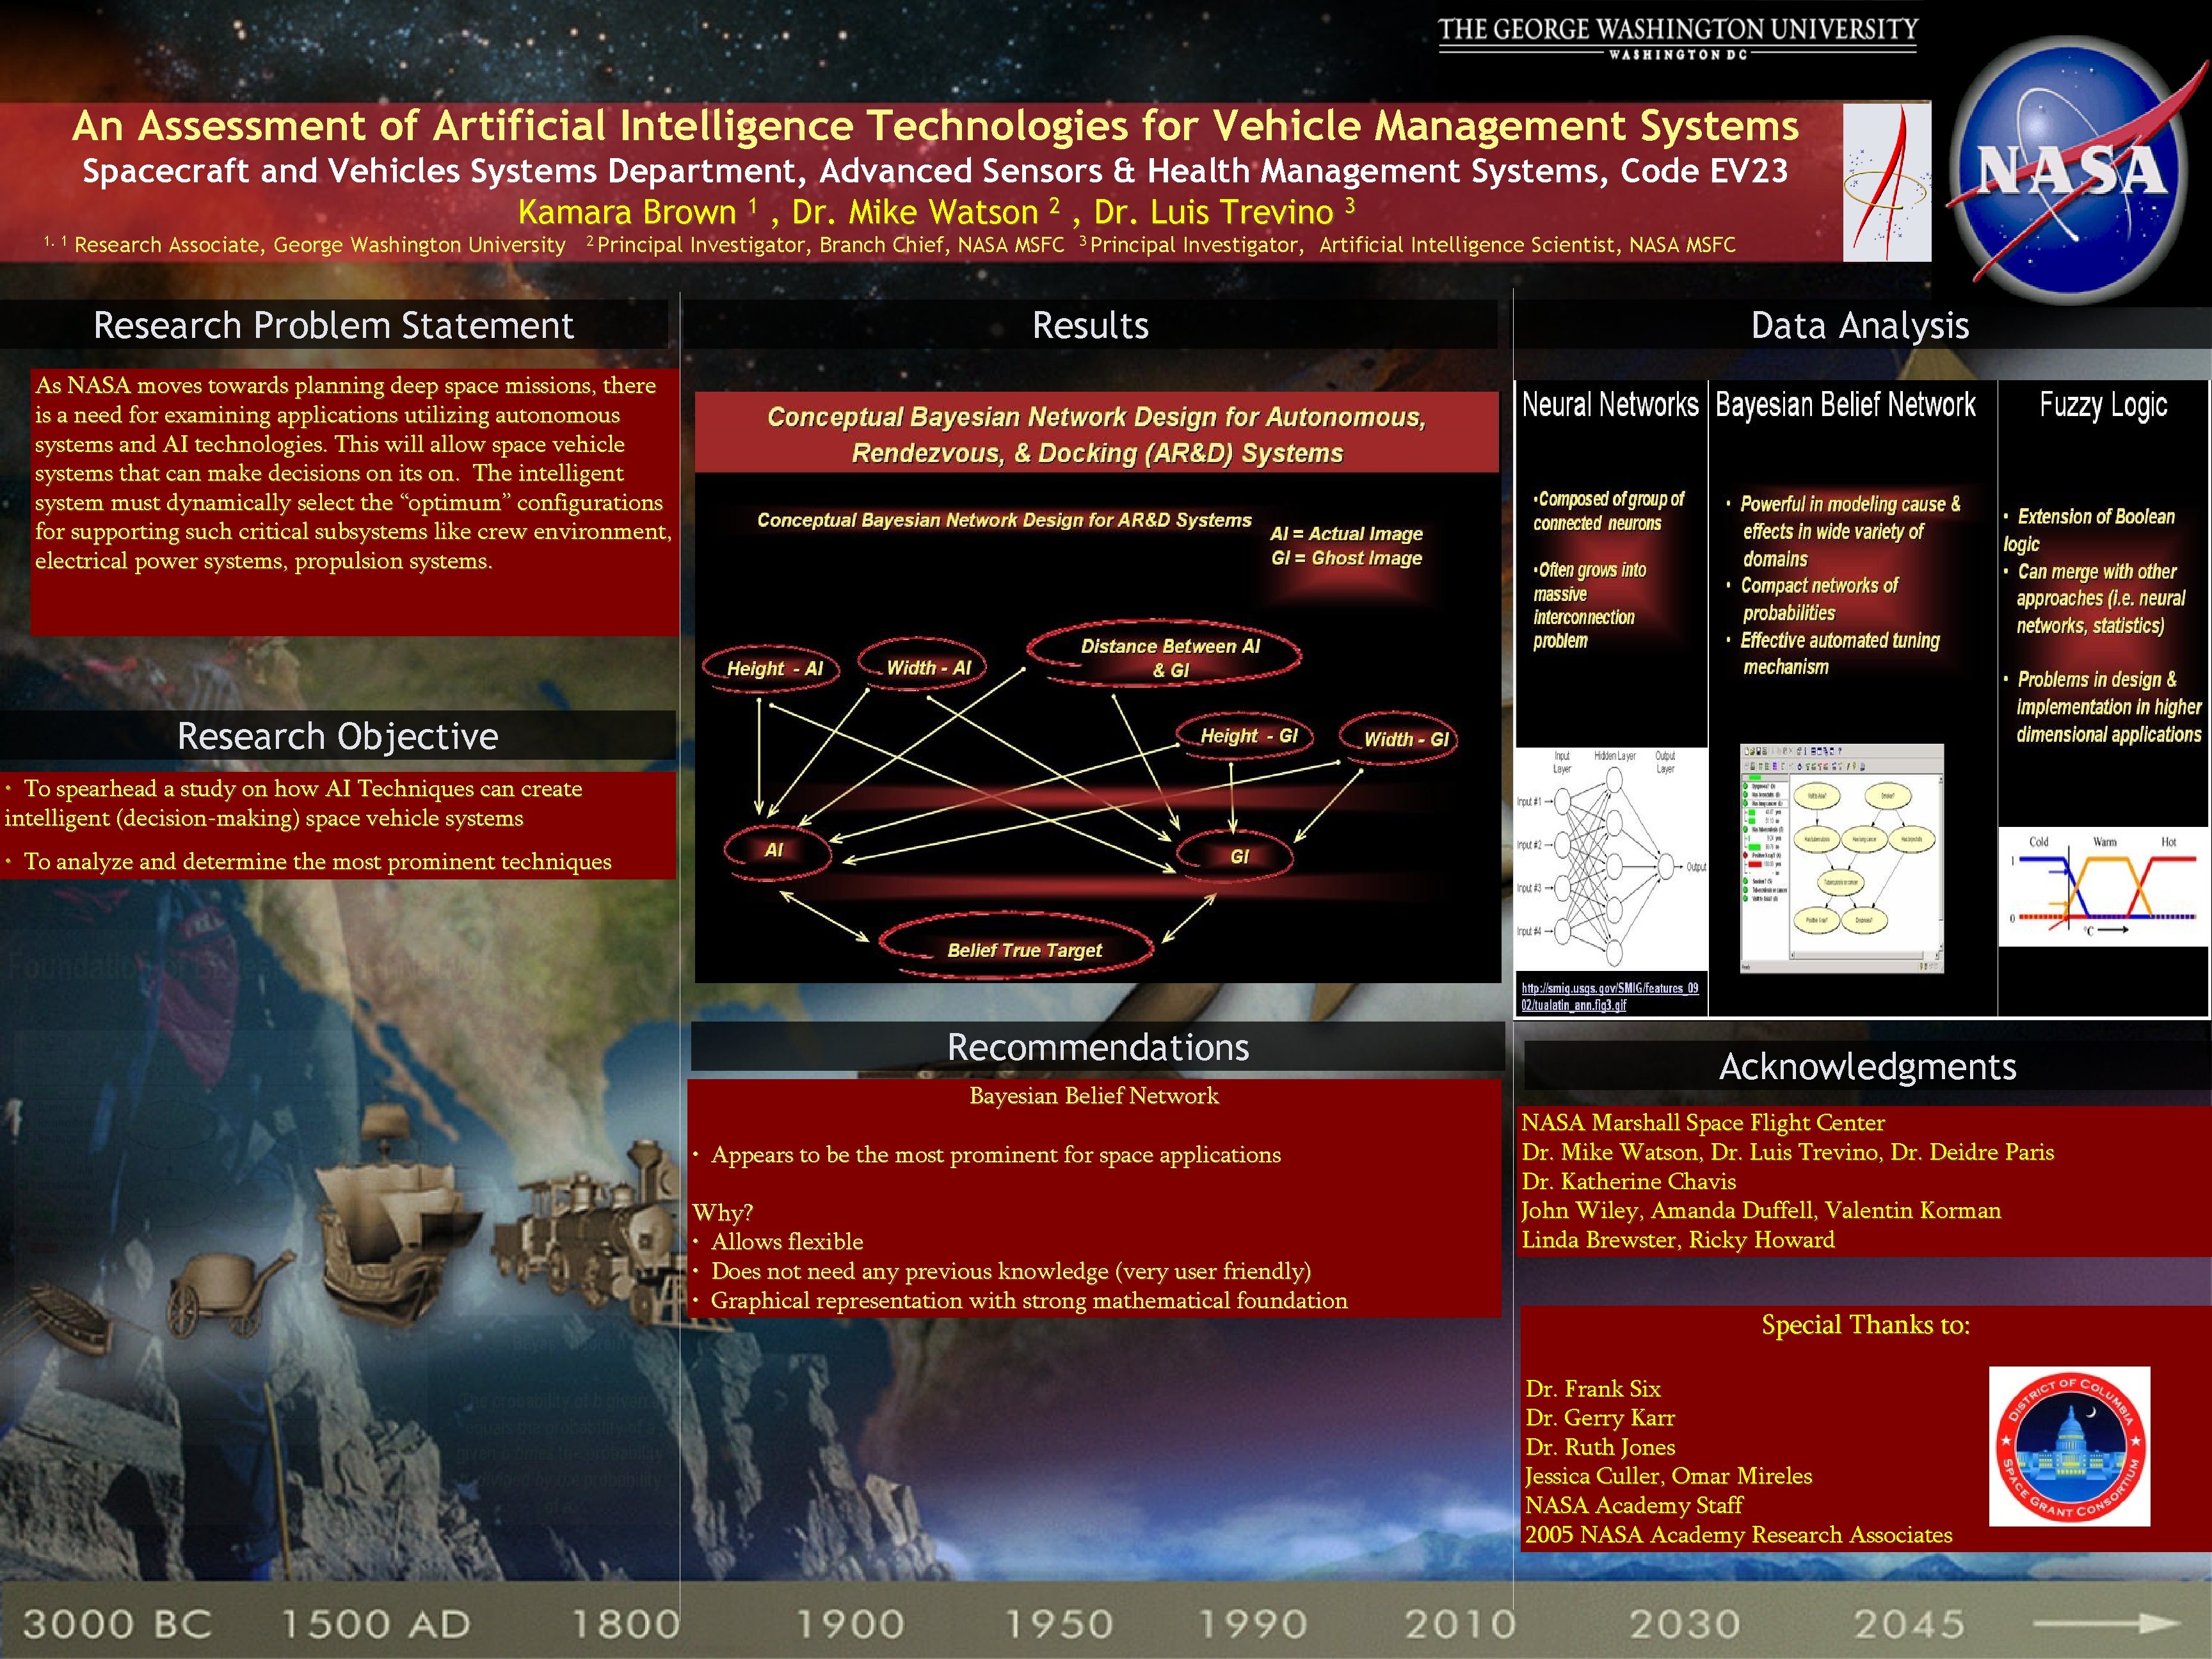 An Assessment of Artificial Intelligence Technologies for Vehicle Management Systems 1. 1 Spacecraft and